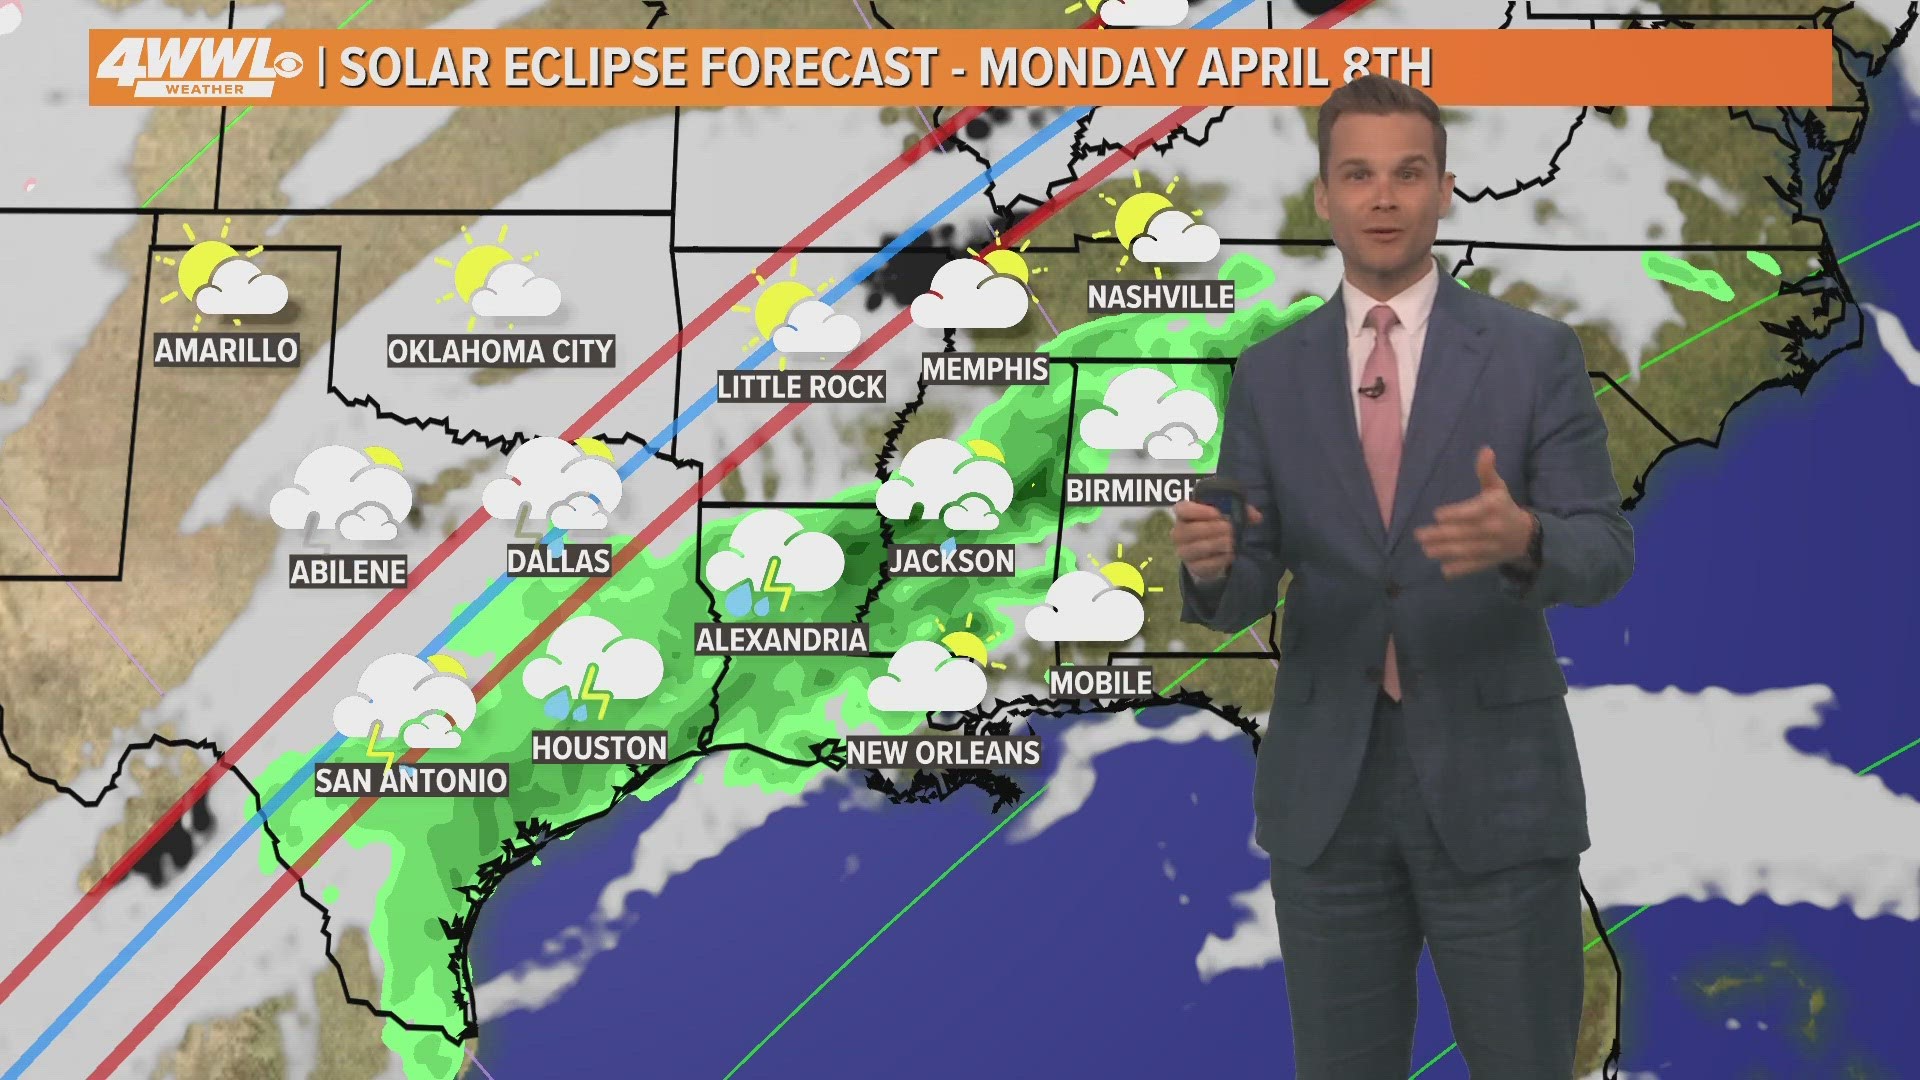 Meteorologist Payton Malone says viewin the solar eclipse in the New Orleans area will be 'hit and miss' at best.